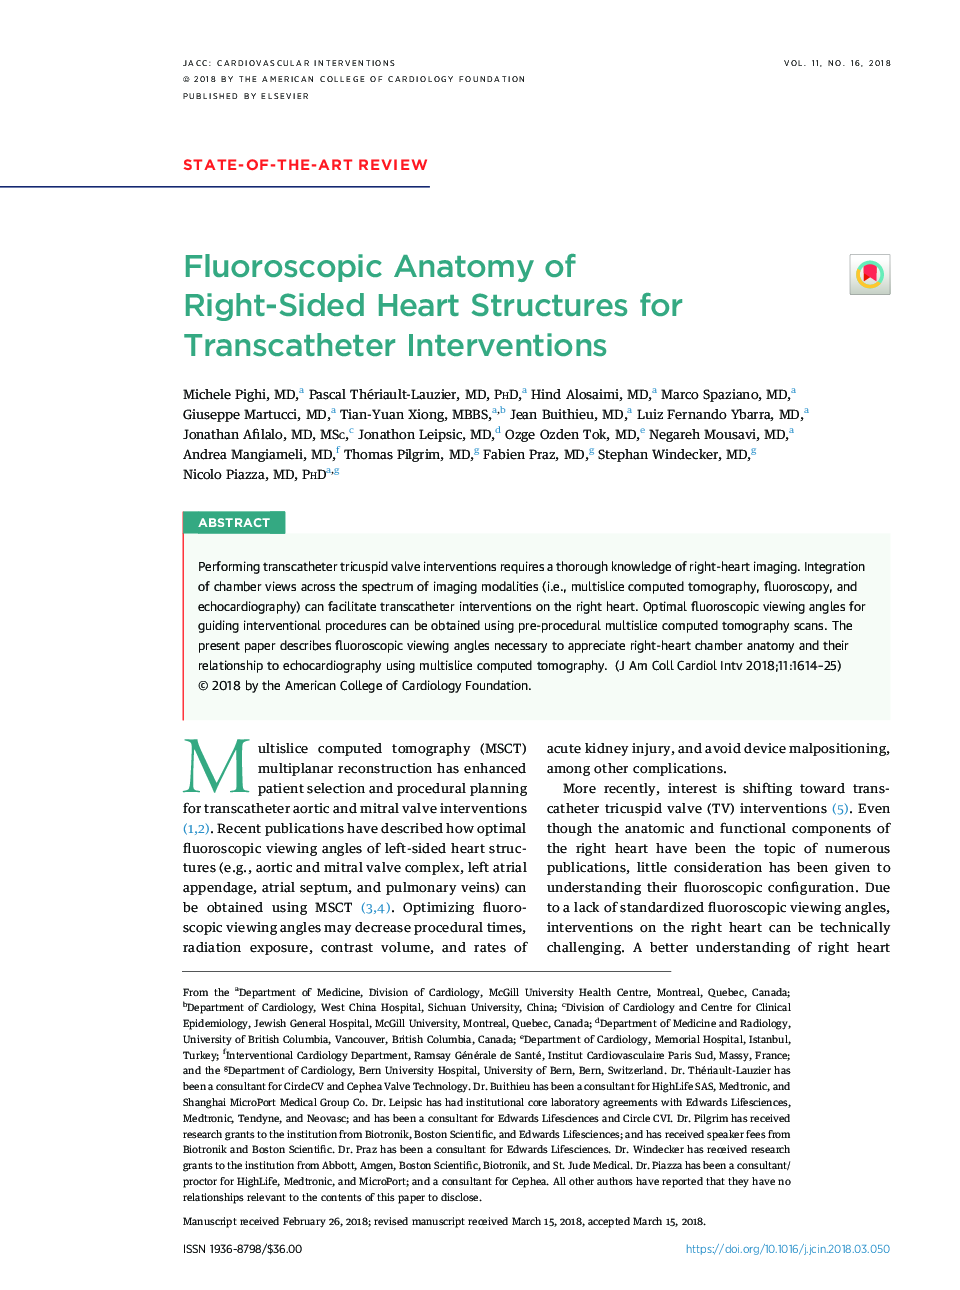 Fluoroscopic Anatomy of Right-Sided Heart Structures for Transcatheter Interventions